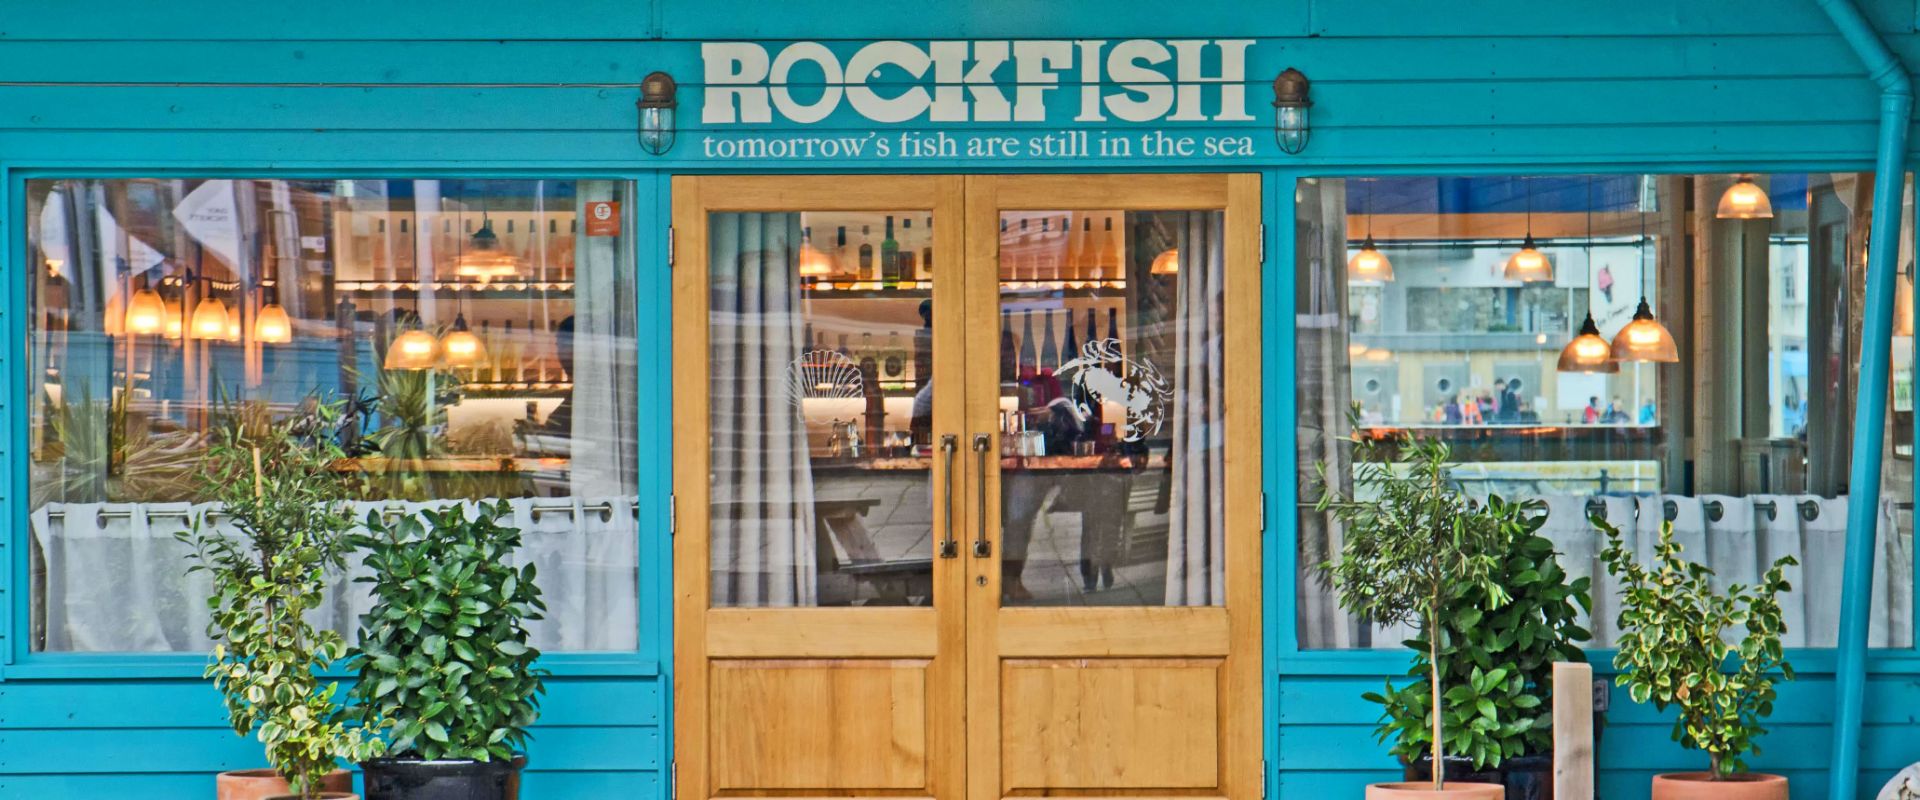 Rockfish Seafood restaurant in Plymouth